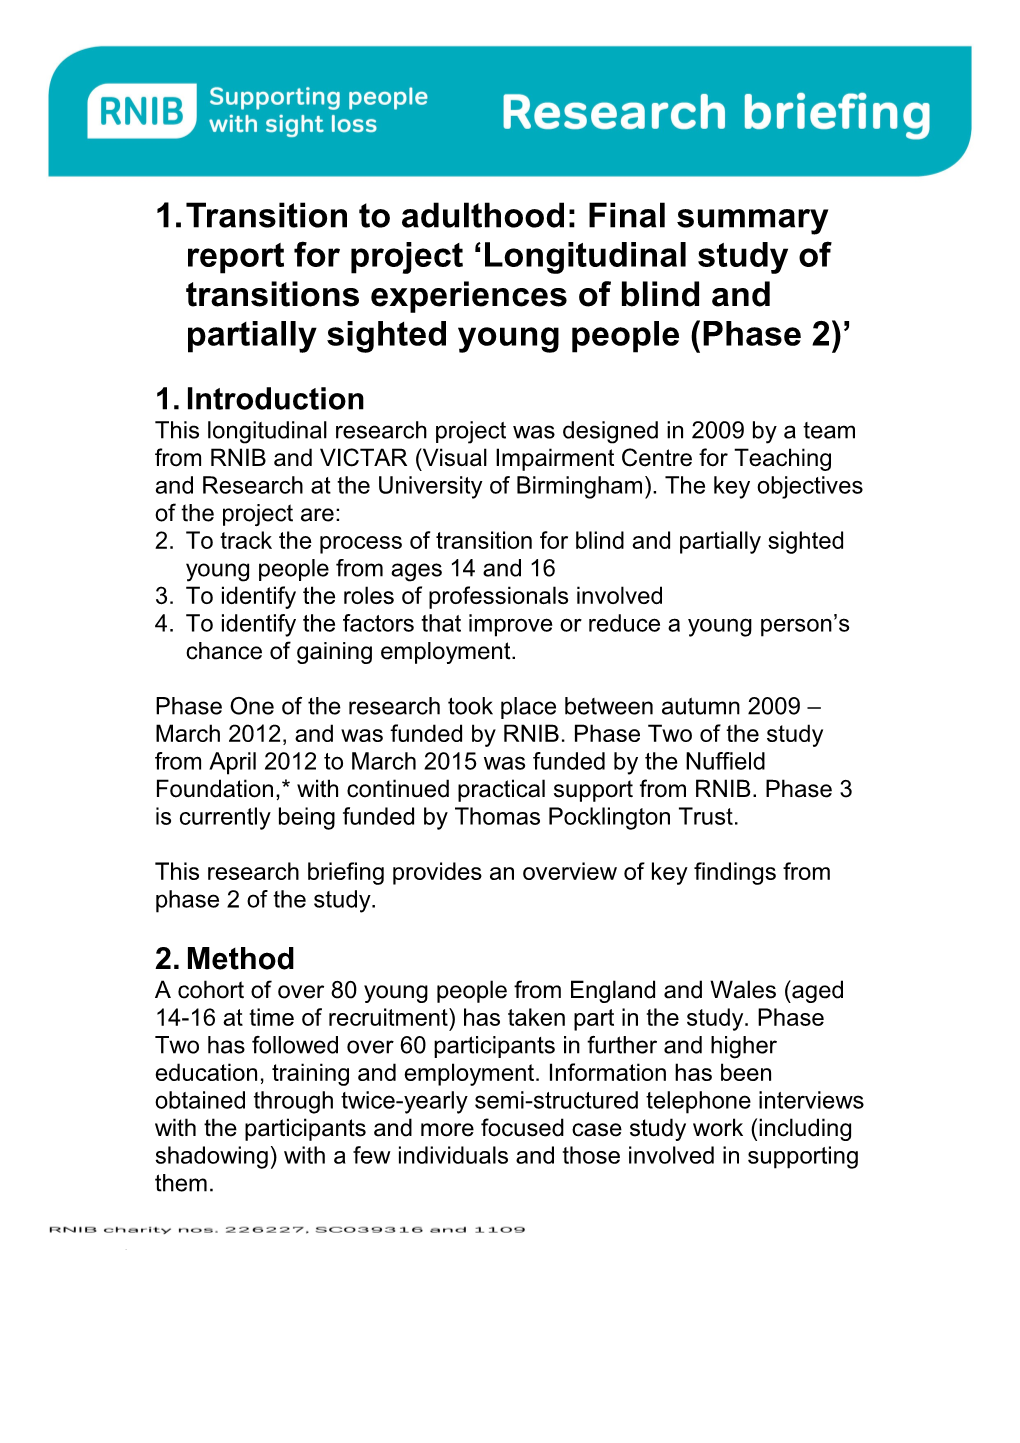 Transition to Adulthood: Final Summary Report for Project Longitudinal Study of Transitions